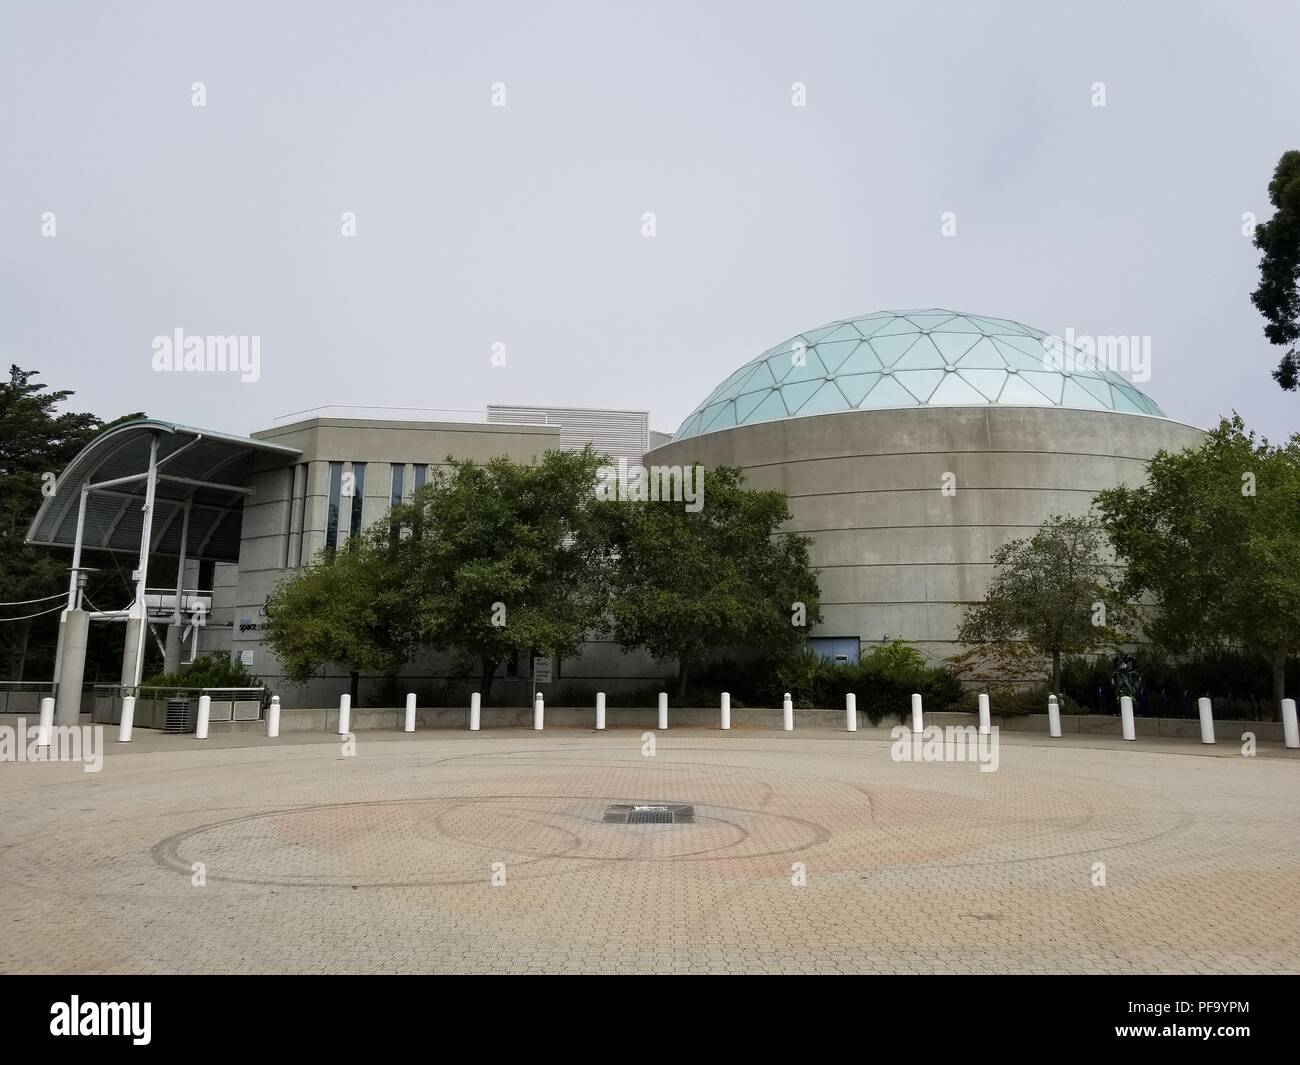 Exterior view with planetarium dome at the Chabot Space and Science Center, a science museum in Oakland, California, June 27, 2018. () Stock Photo